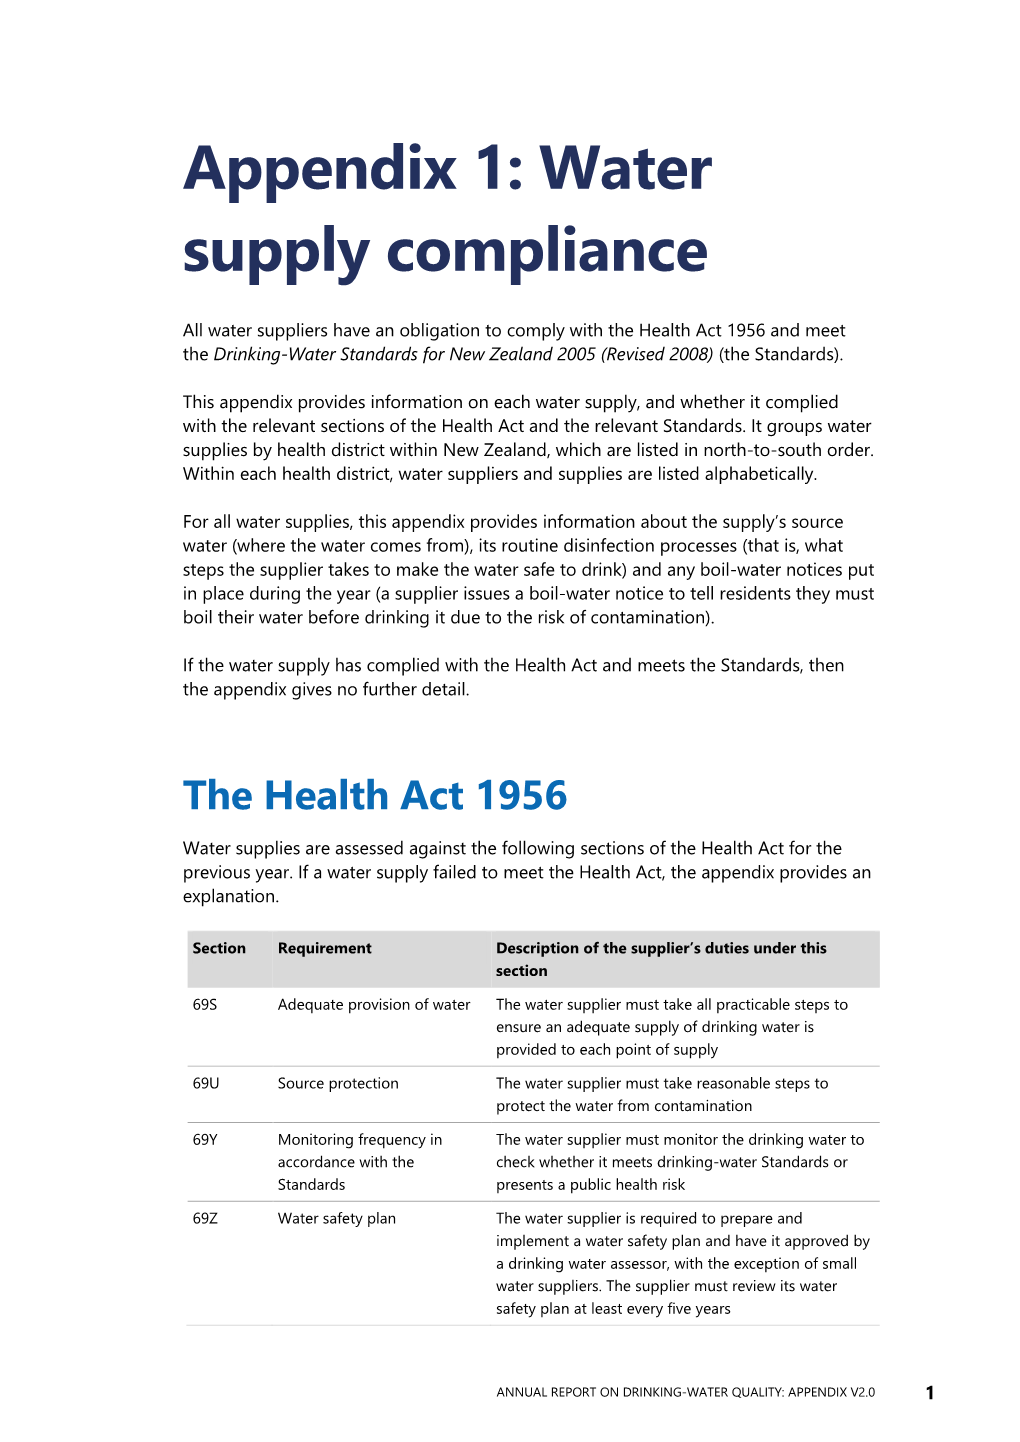 Appendix 1: Water Supply Compliance